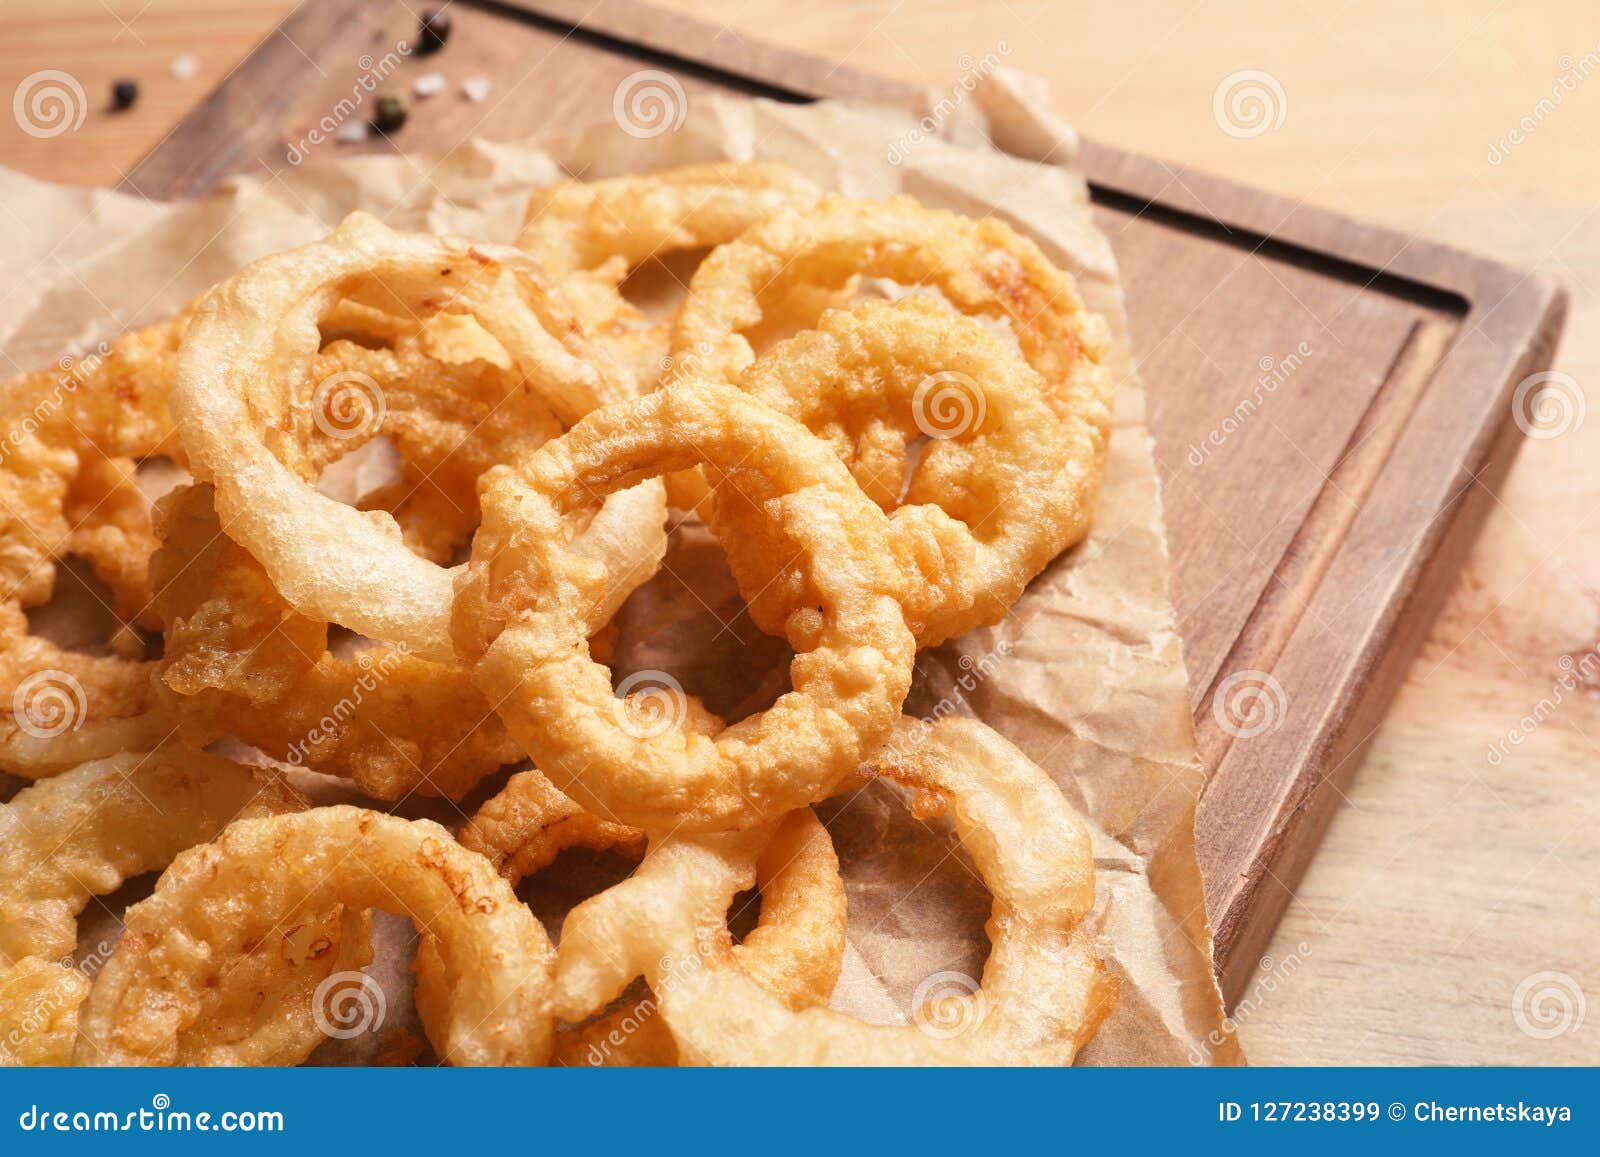 Homemade Crunchy Fried Onion Rings on Wooden Board Stock Image - Image ...